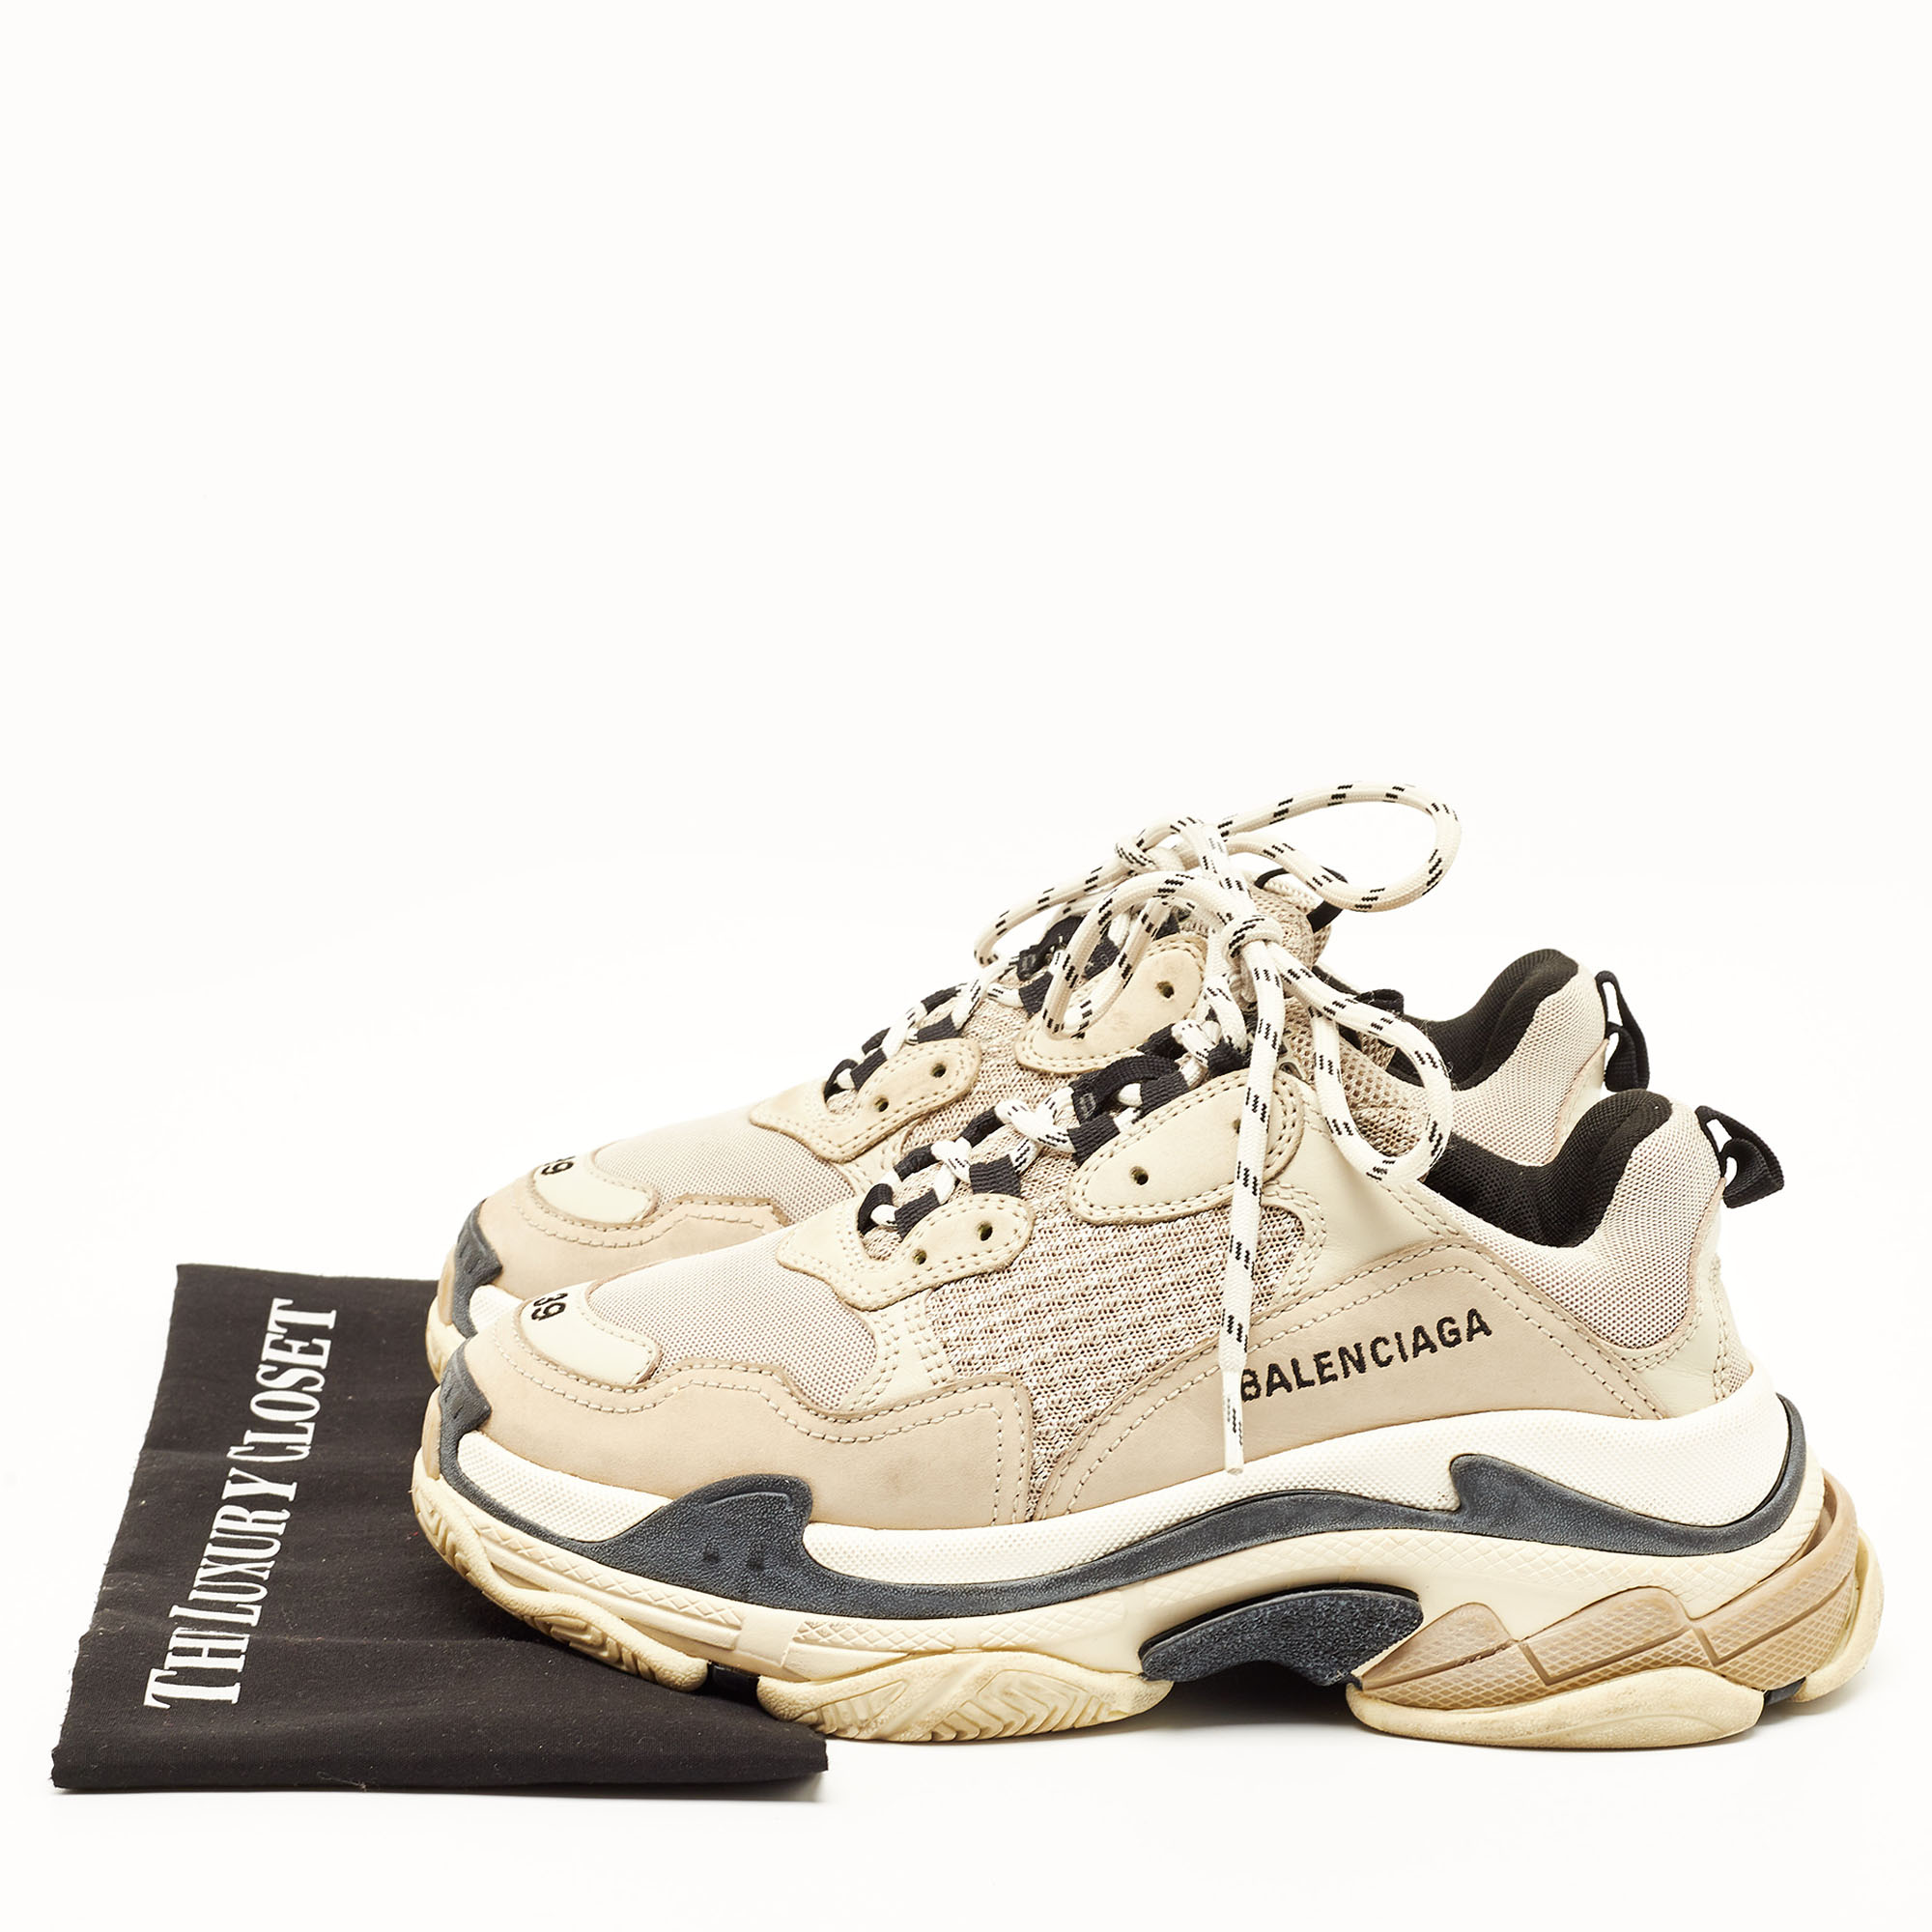 Balenciaga Grey Mesh And Leather Triple S Sneakers Size 39